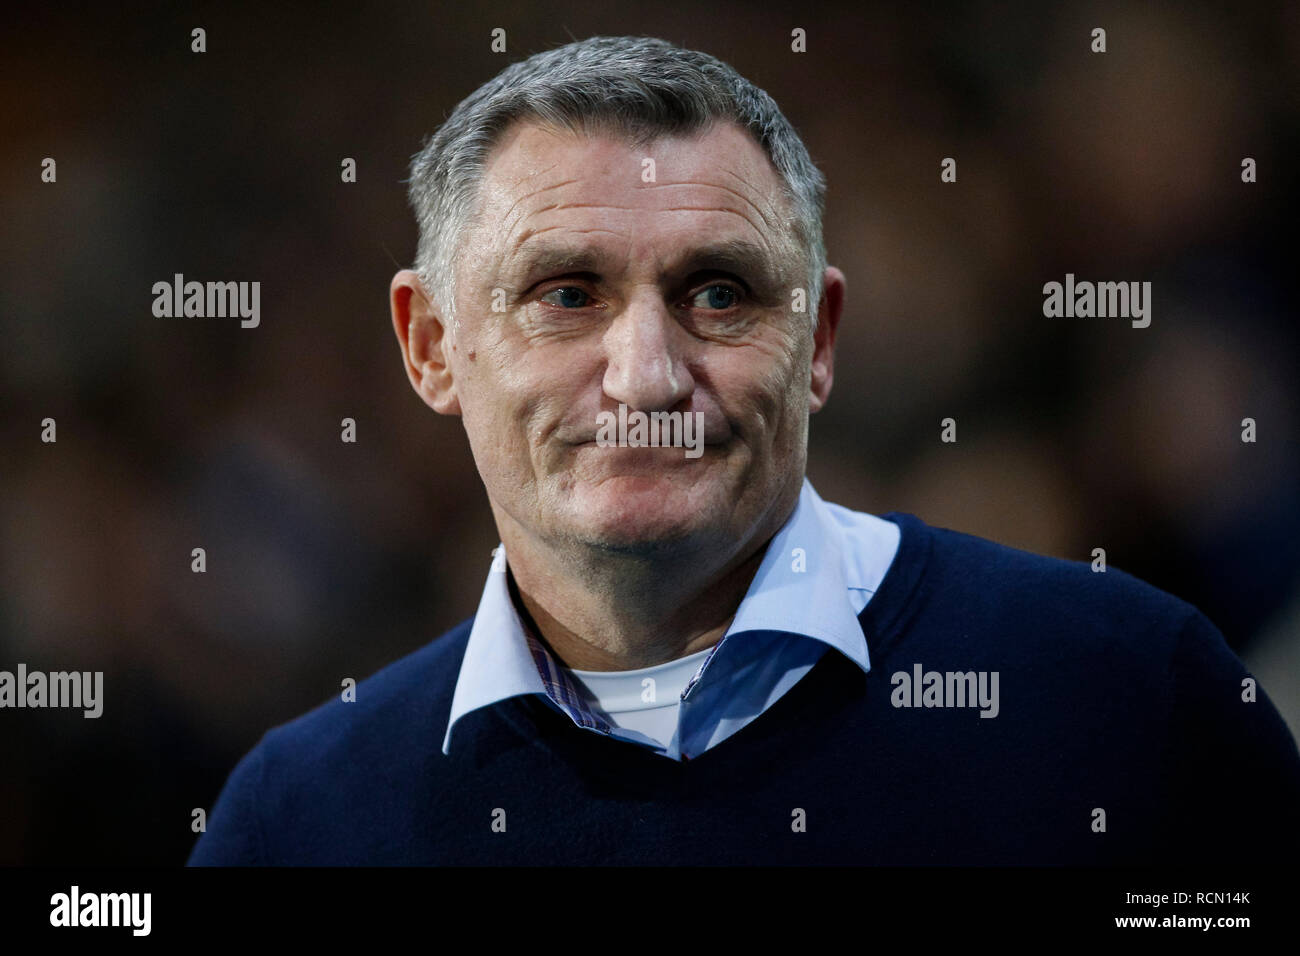 Blackburn, Lancashire, UK. 15th Jan 2019. Blackburn, Lancashire, UK. 15th Jan, 2019. Blackburn Rovers Manager Tony Mowbray during the FA Cup Third Round replay between Blackburn Rovers and Newcastle United at Ewood Park on January 15th 2019 in Blackburn, England. Credit: PHC Images/Alamy Live News Stock Photo